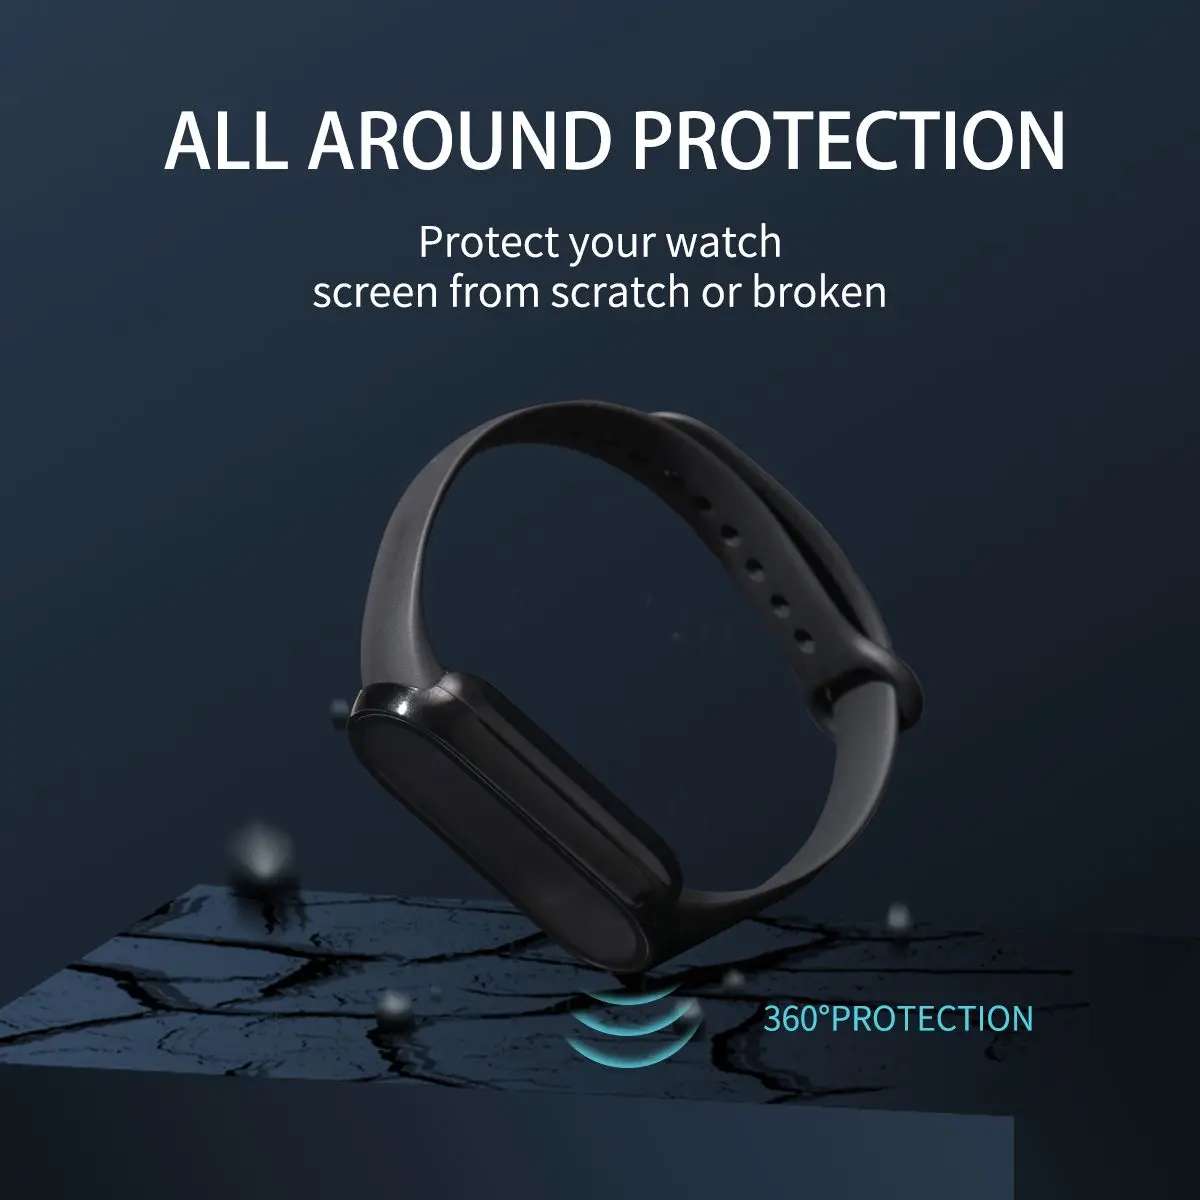 Luxury Watch Frame PC Case For Xiaomi Mi band 4 5 6 Screen Protector Case+Film Guard Shell Bumper Protective Cover